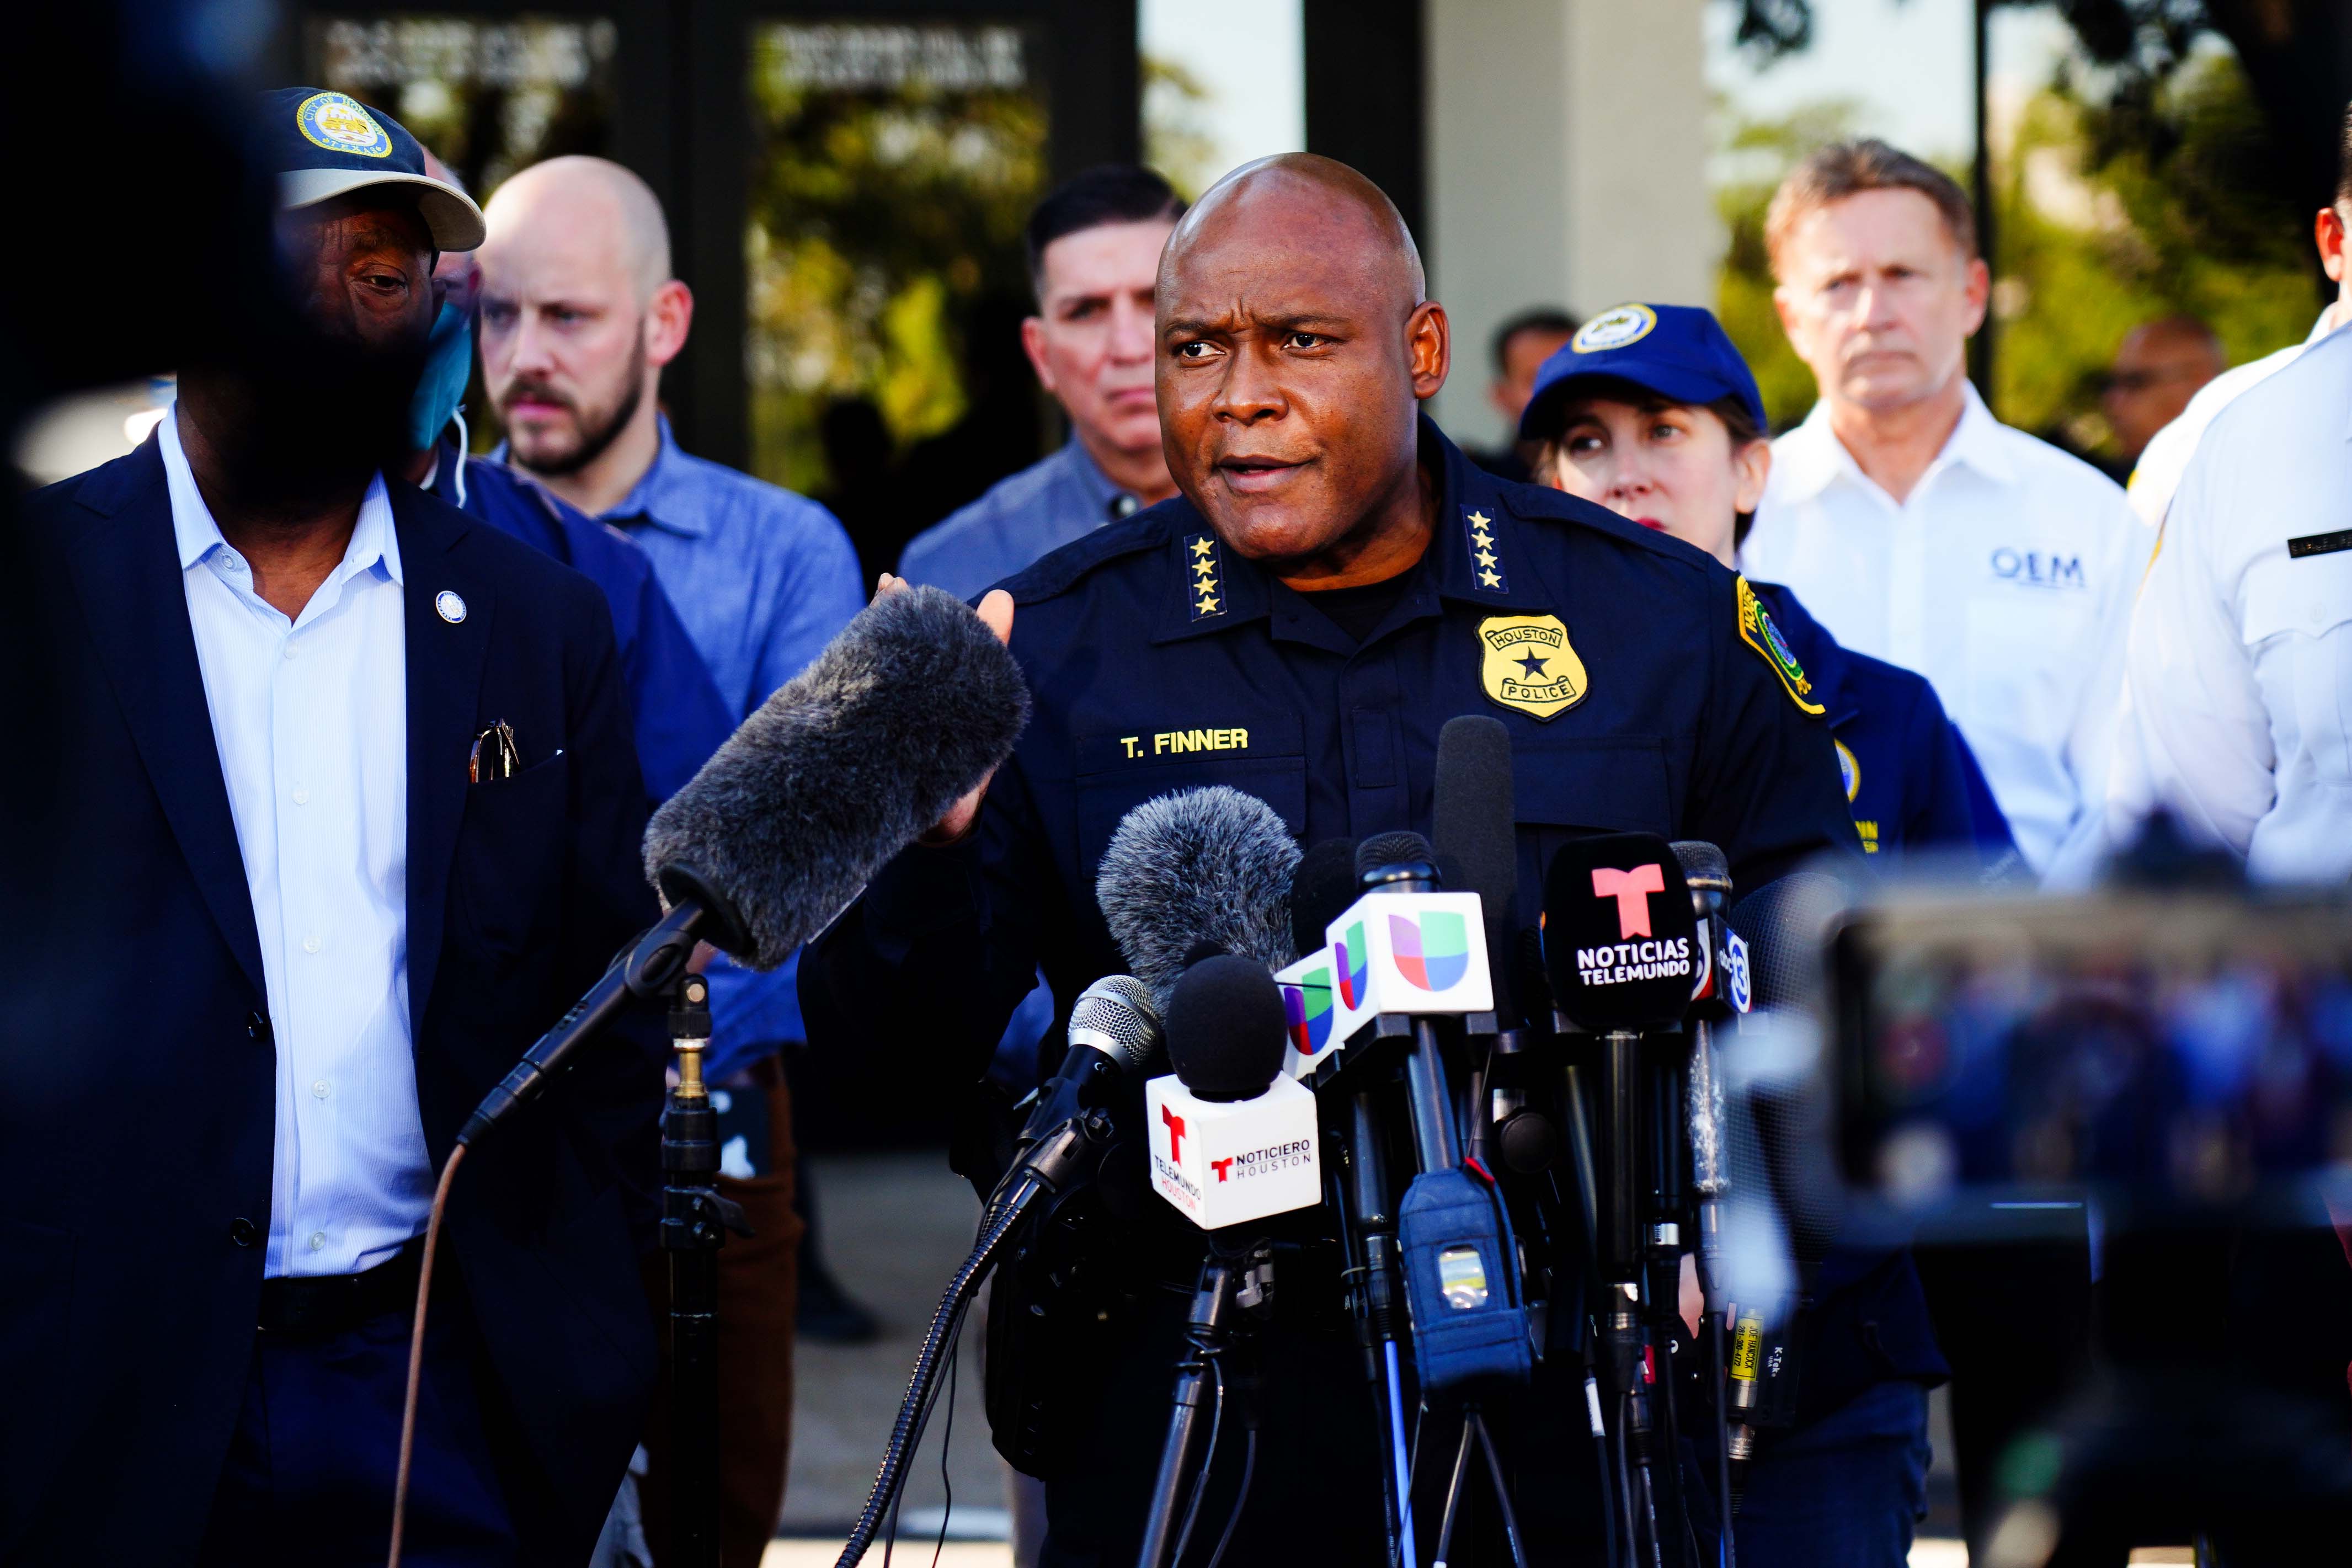 Houston Chief of Police Troy Finner speaks at the press conference addressing the cancellation of the Astroworld festival at the Wyndham Hotel family reunification center on 6 November 2021 in Houston, Texas